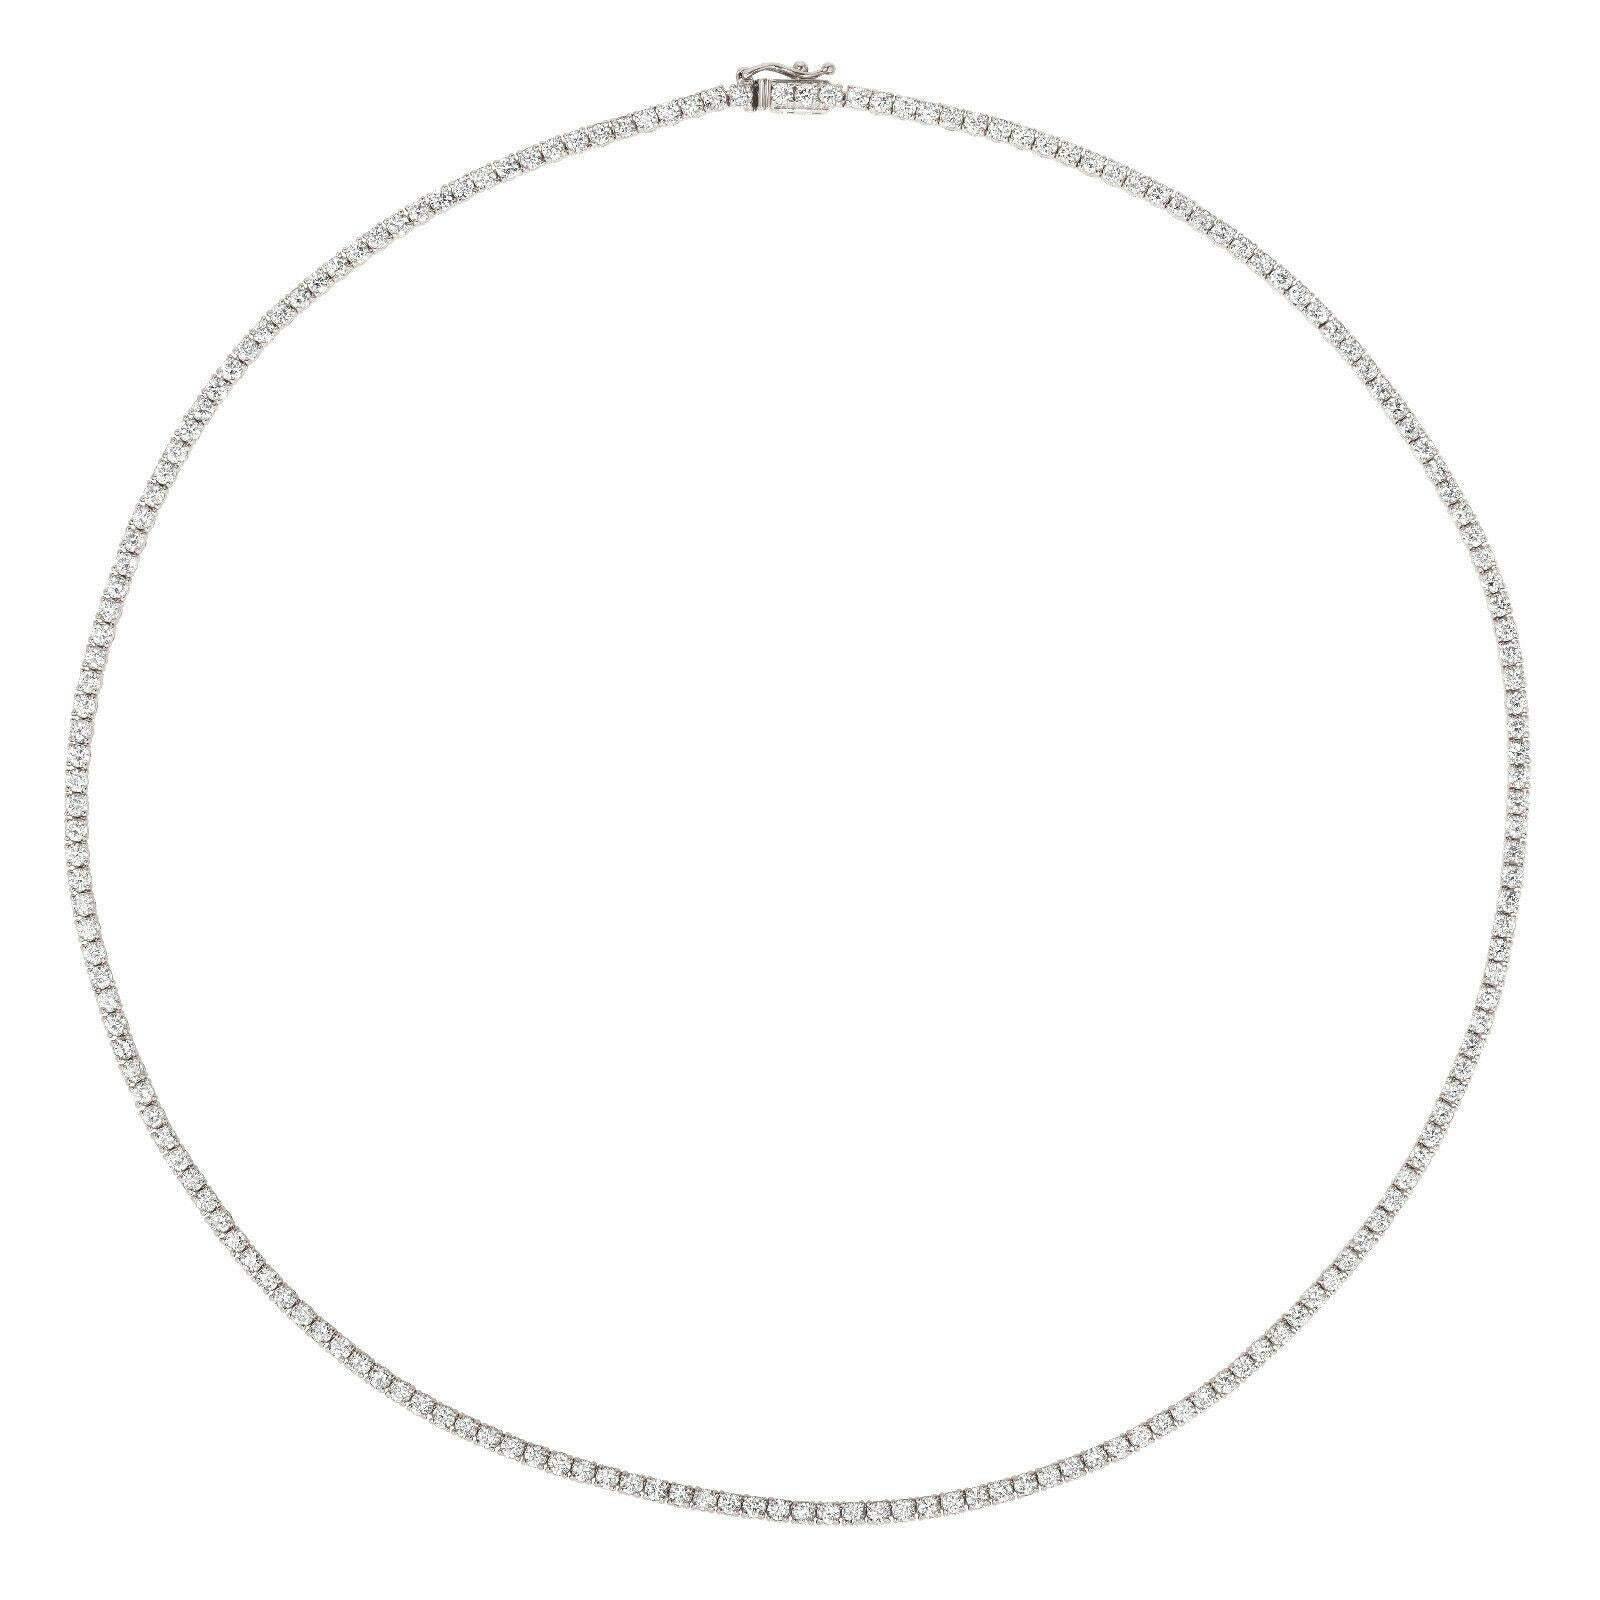 7.00 Carat Diamond Tennis Necklace G SI 14K White Gold 16 inches

100% Natural Diamonds, Not Enhanced in any way Round Cut Diamond  Necklace  
7.00CT
G-H 
SI  
14K White Gold, Pave
16 inches in length
157 Diamonds

N5675.04W16
ALL OUR ITEMS ARE